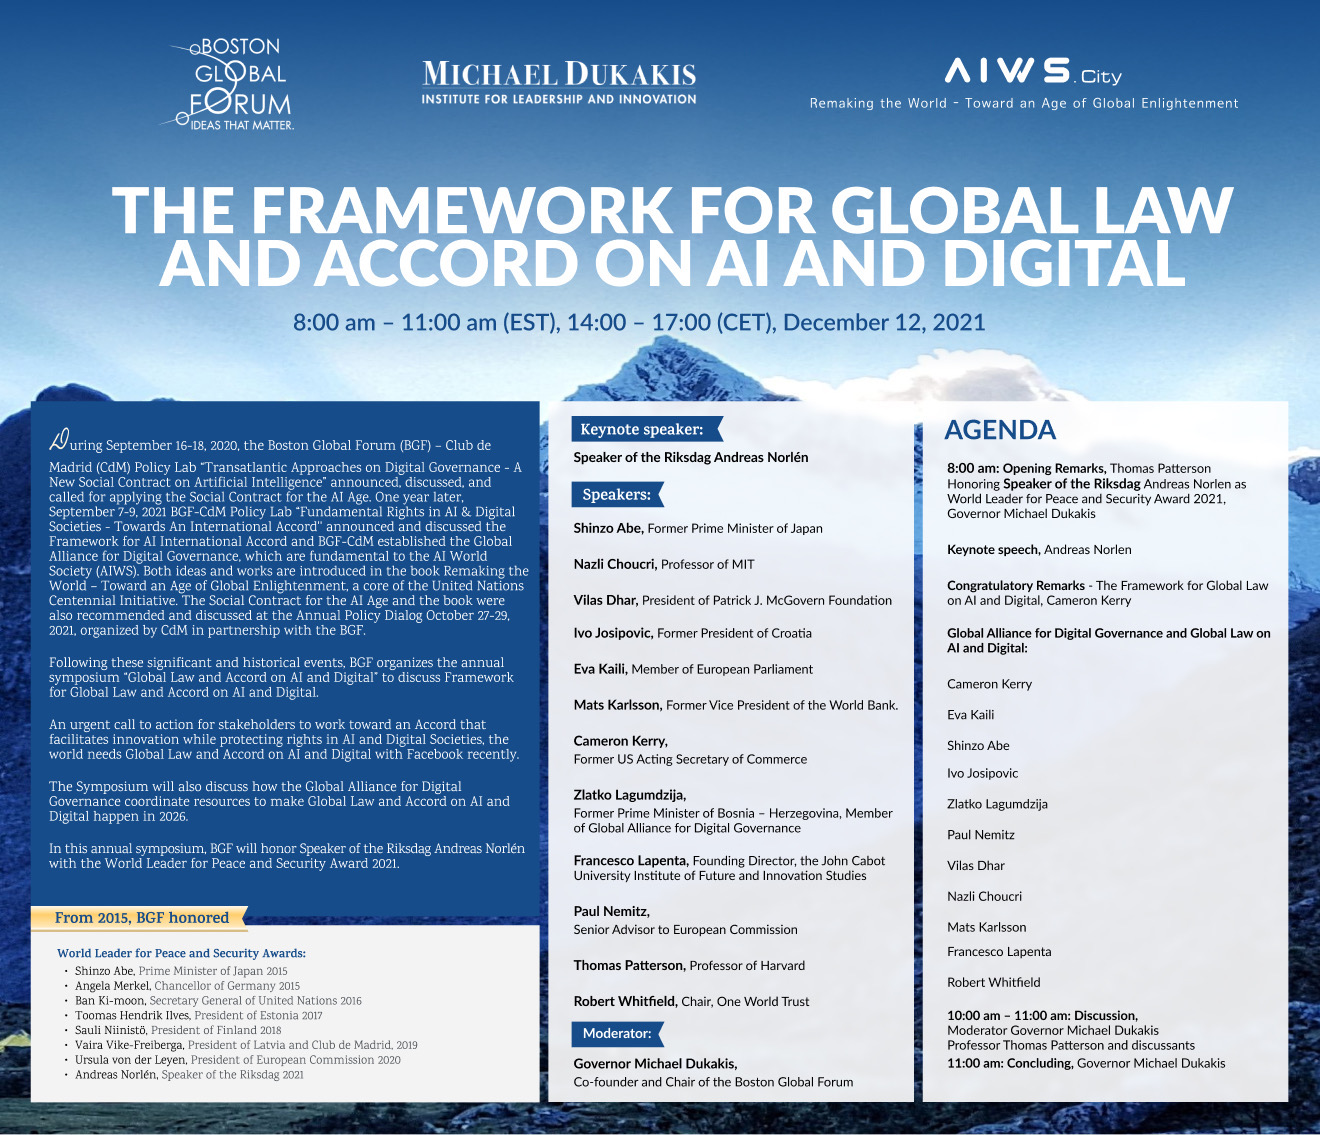 Global Cybersecurity Day "Framework for Global Law and Accord on AI and Digital" symposium and award ceremony 